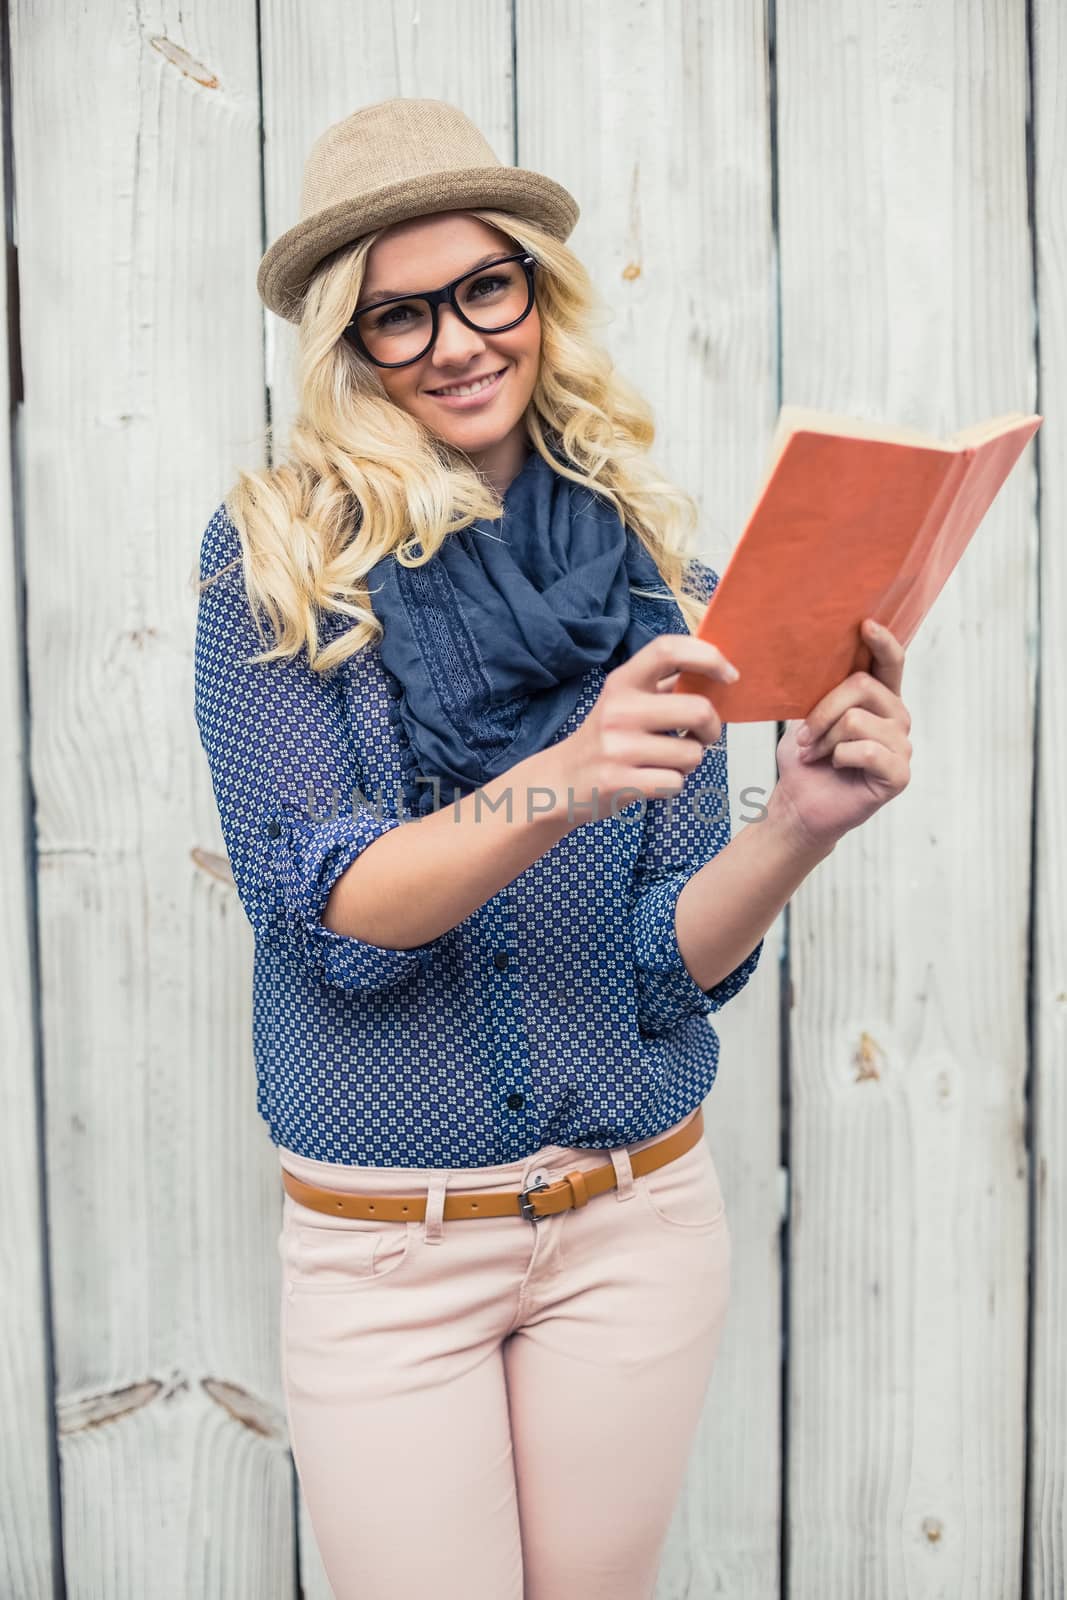 Smiling fashionable blonde holding book outdoors on wooden background